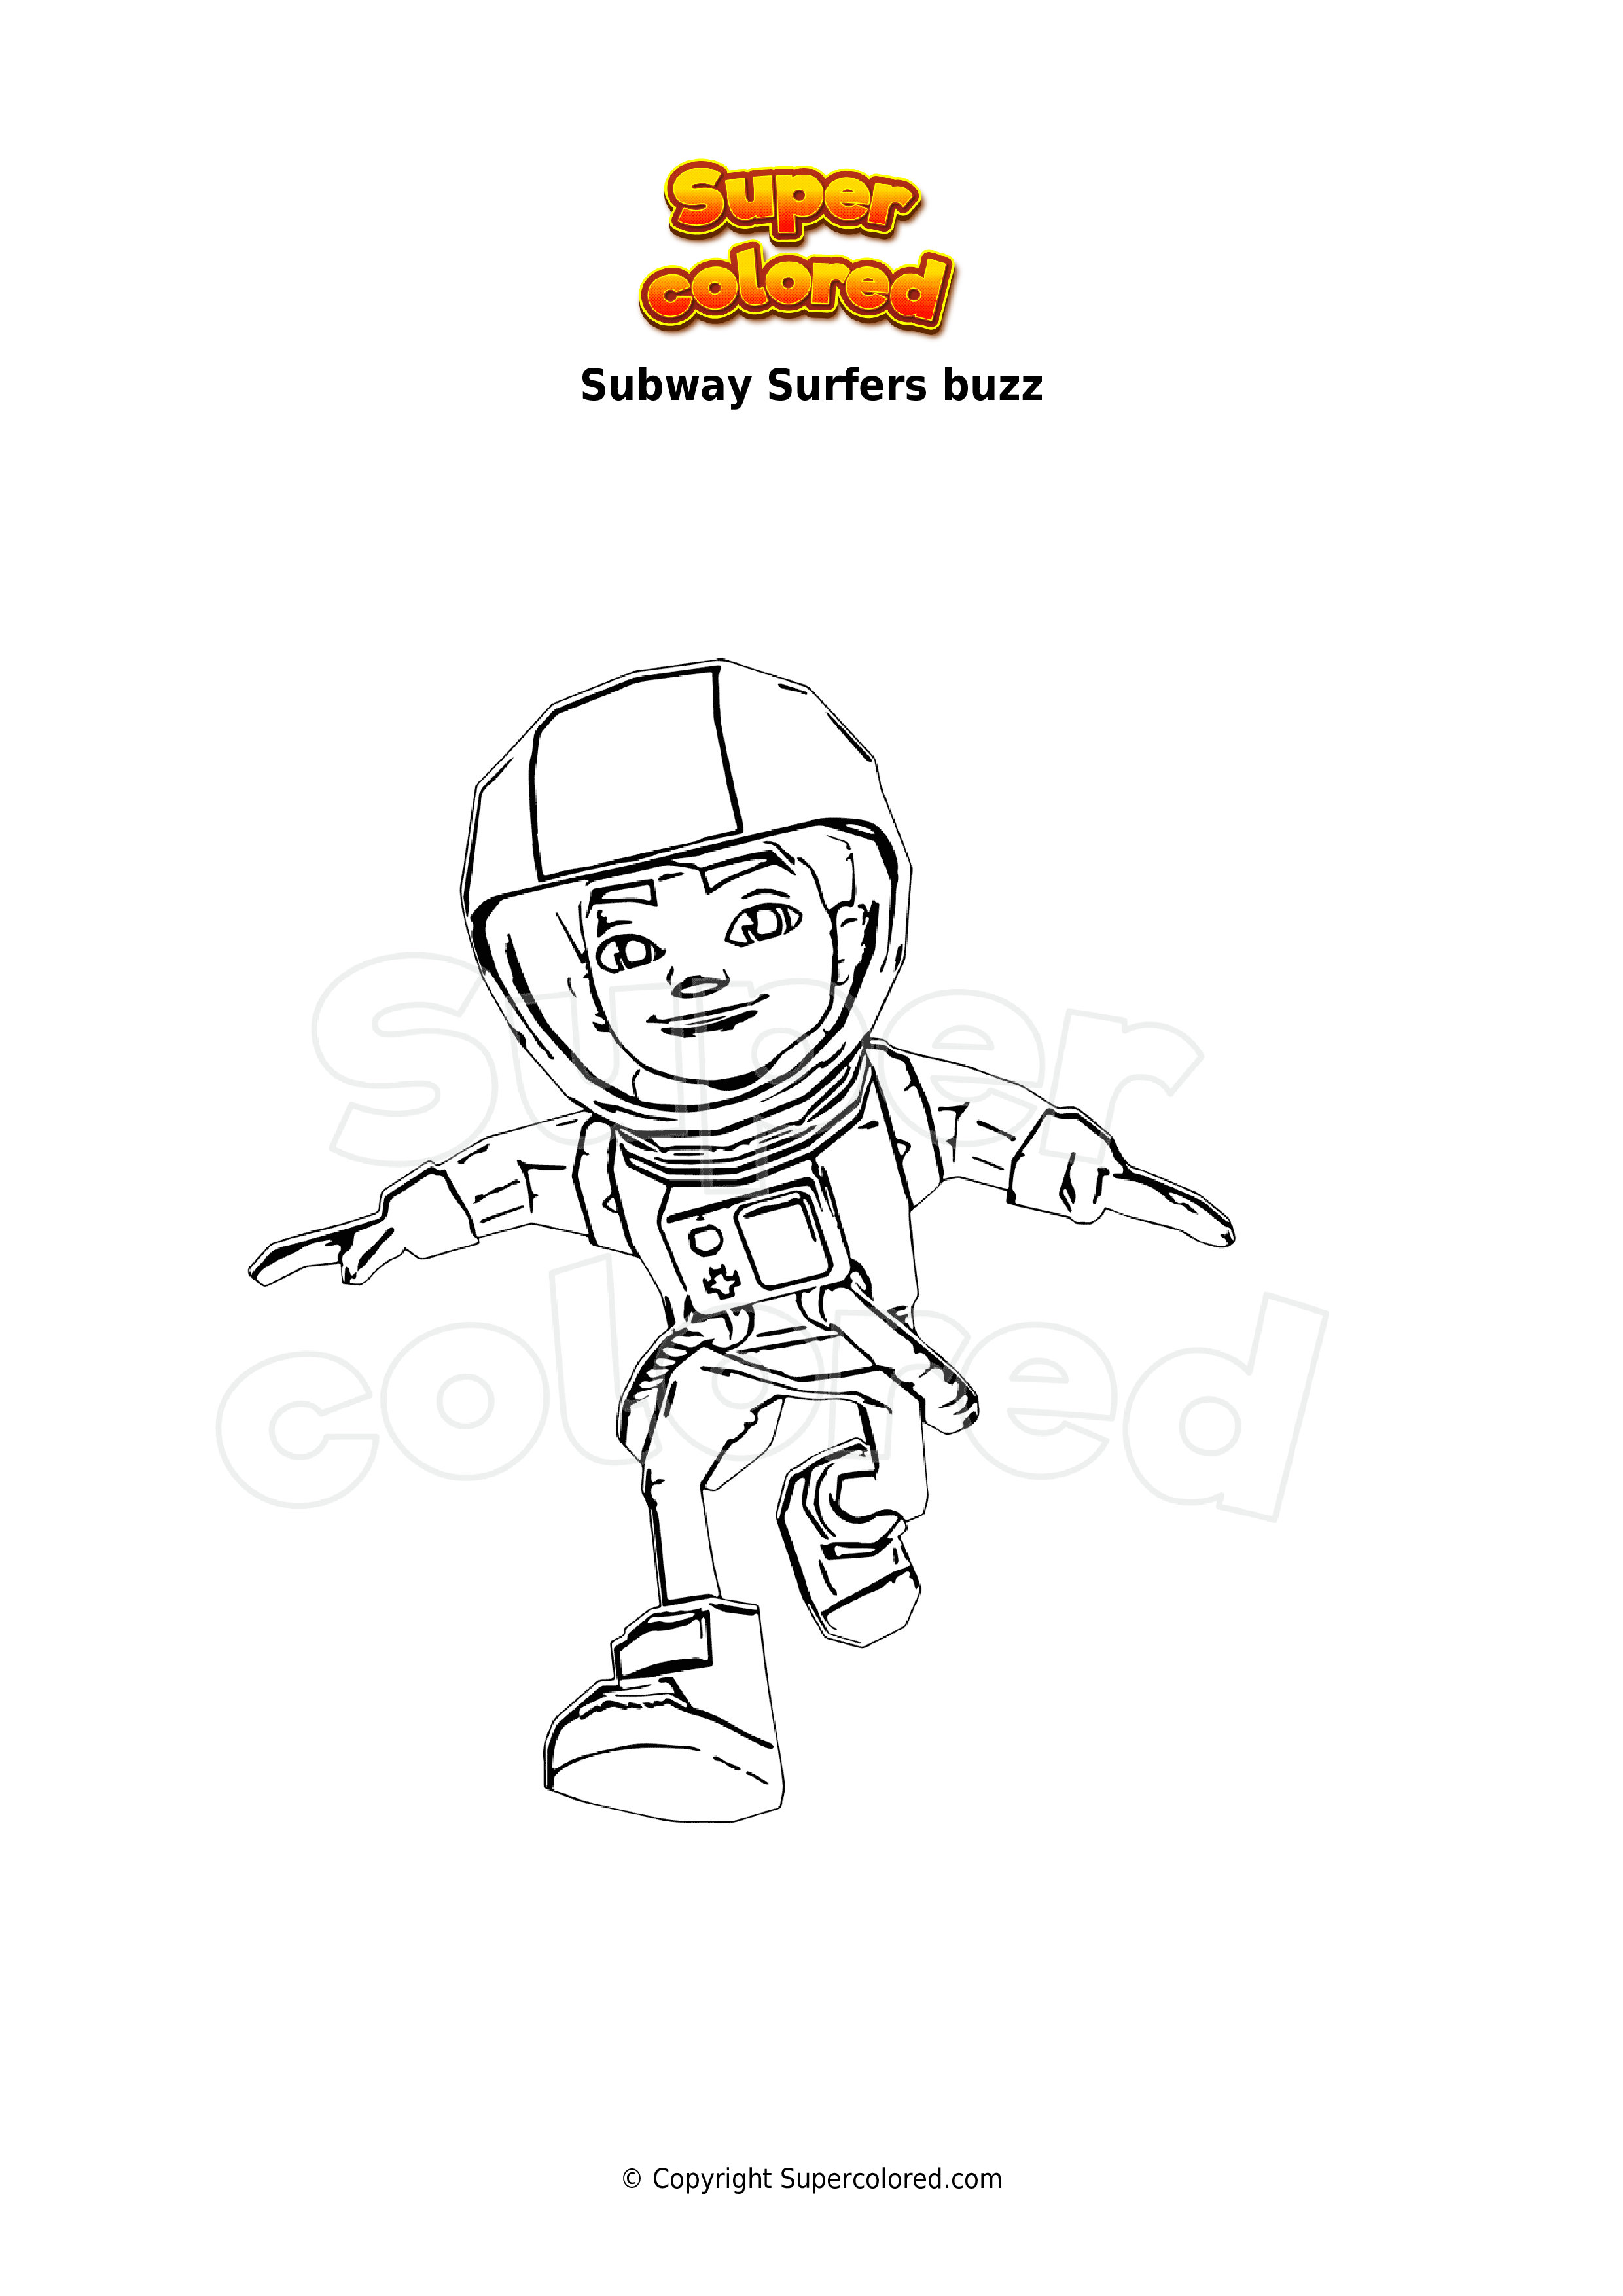 Coloring page Subway Surfers 2  Subway surfers, Surfer, Coloring pages